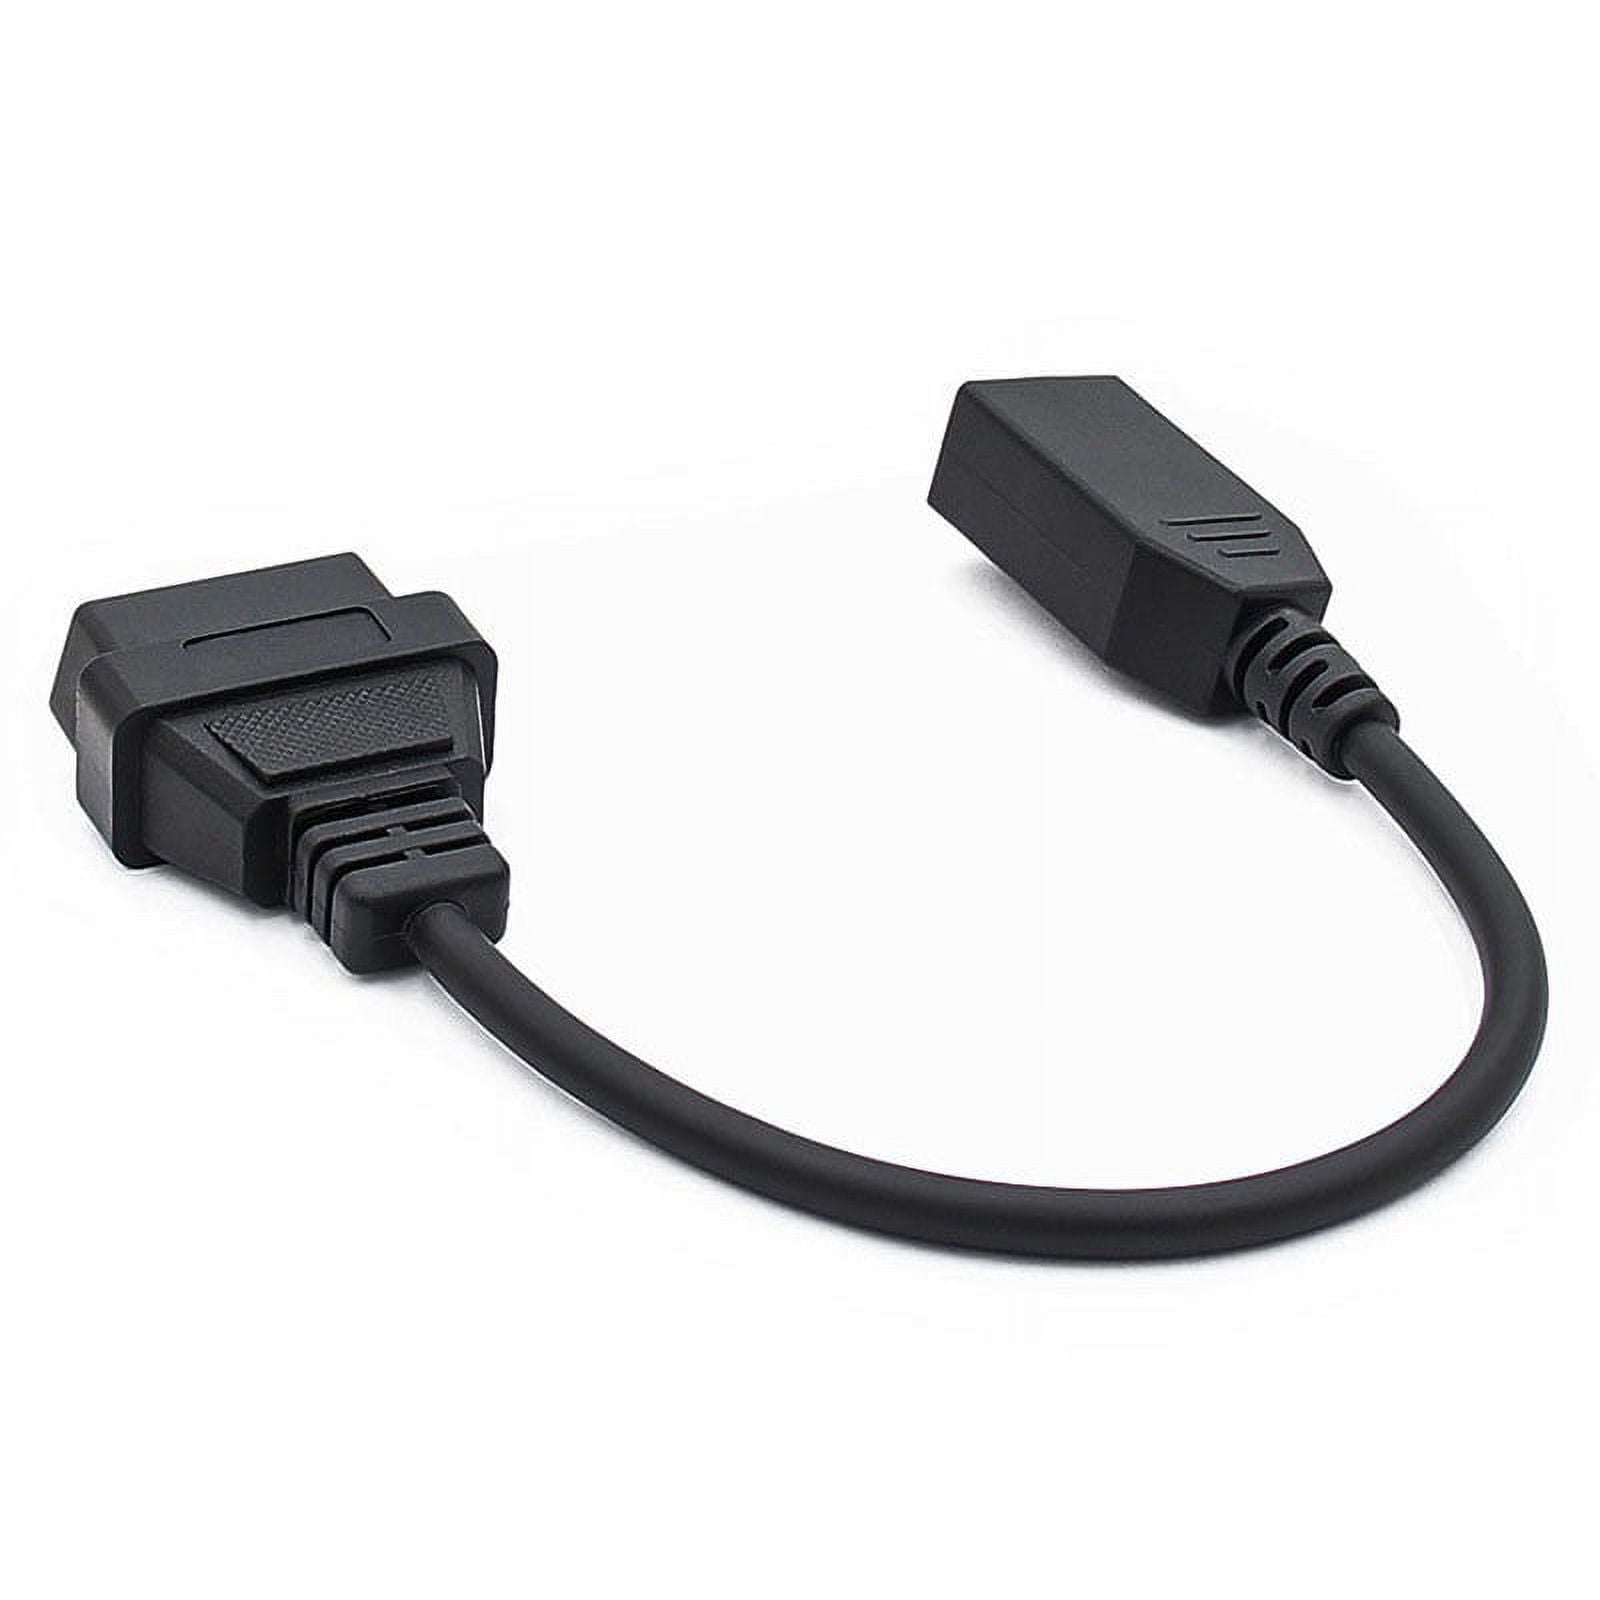 P55C OBD2 Carly Adapter 30 cm Diagnostic Plug 3-Pin to 16-Pin Diagnostic  Plug Cable Adapter Car Diagnostic Scanner Extension Adapter Tool for Honda A